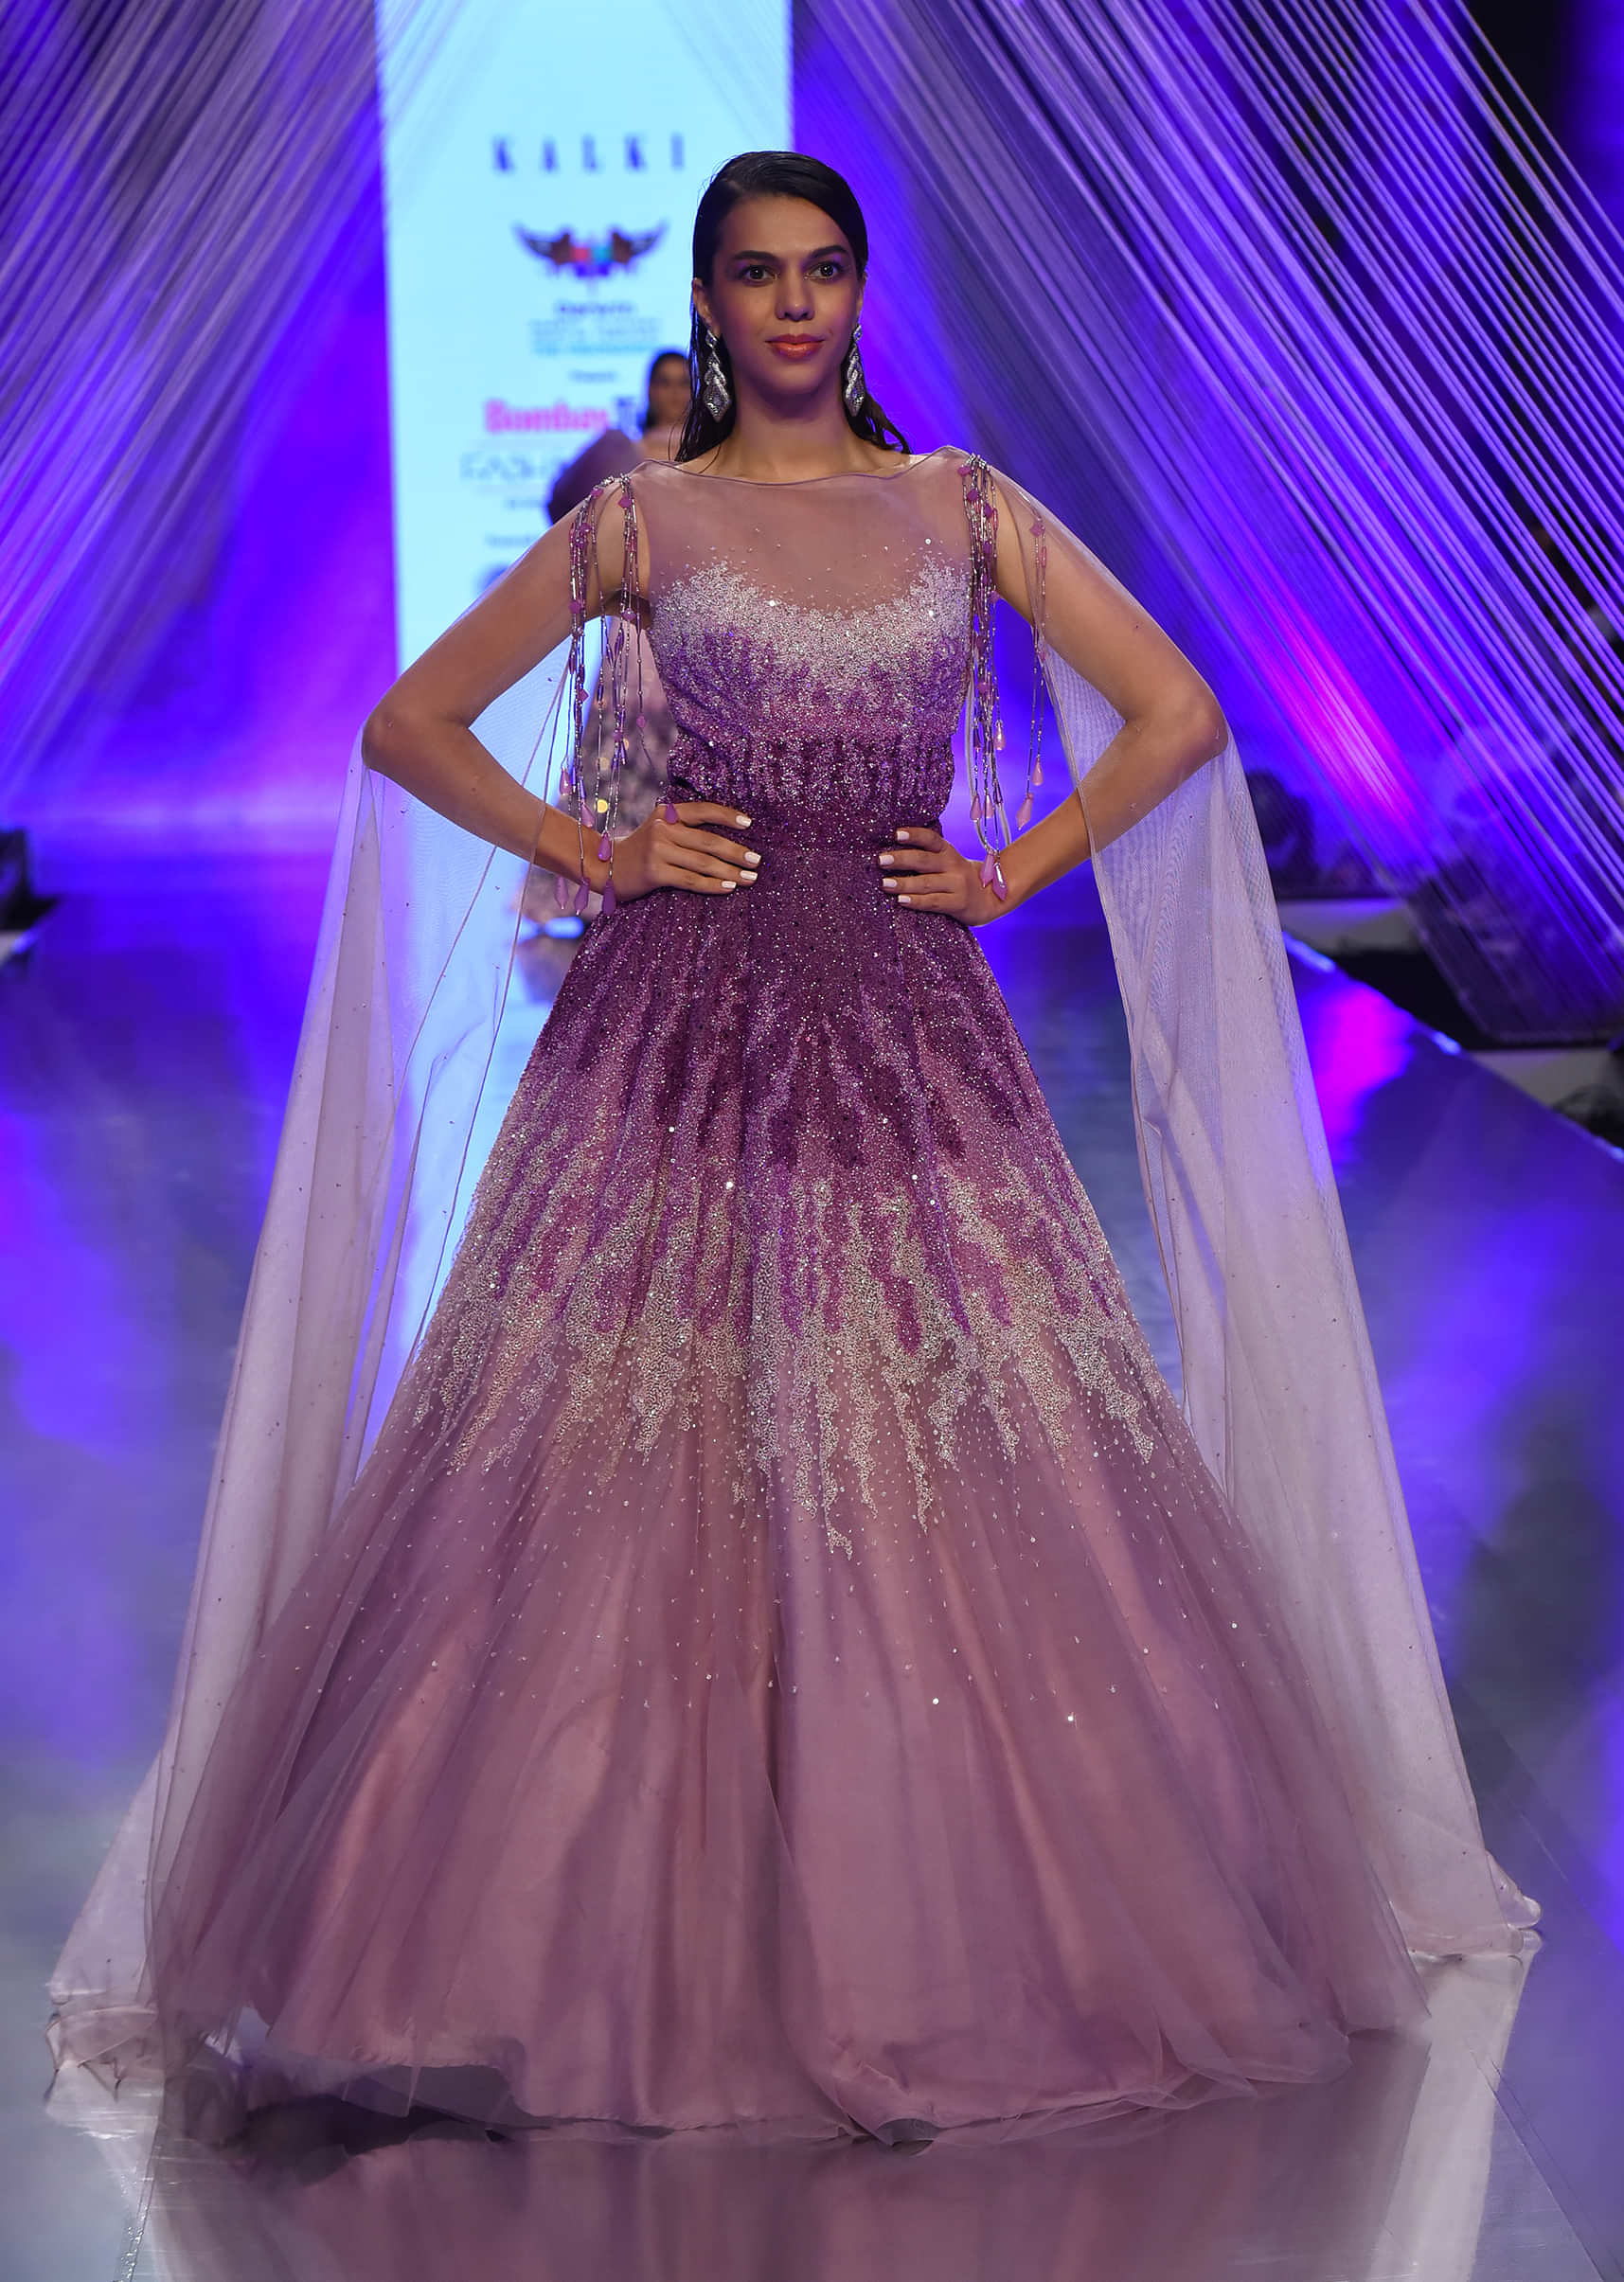 Lavender Ombre Gown In Sequins Embroidery, Crafted In Net With A Long Cape